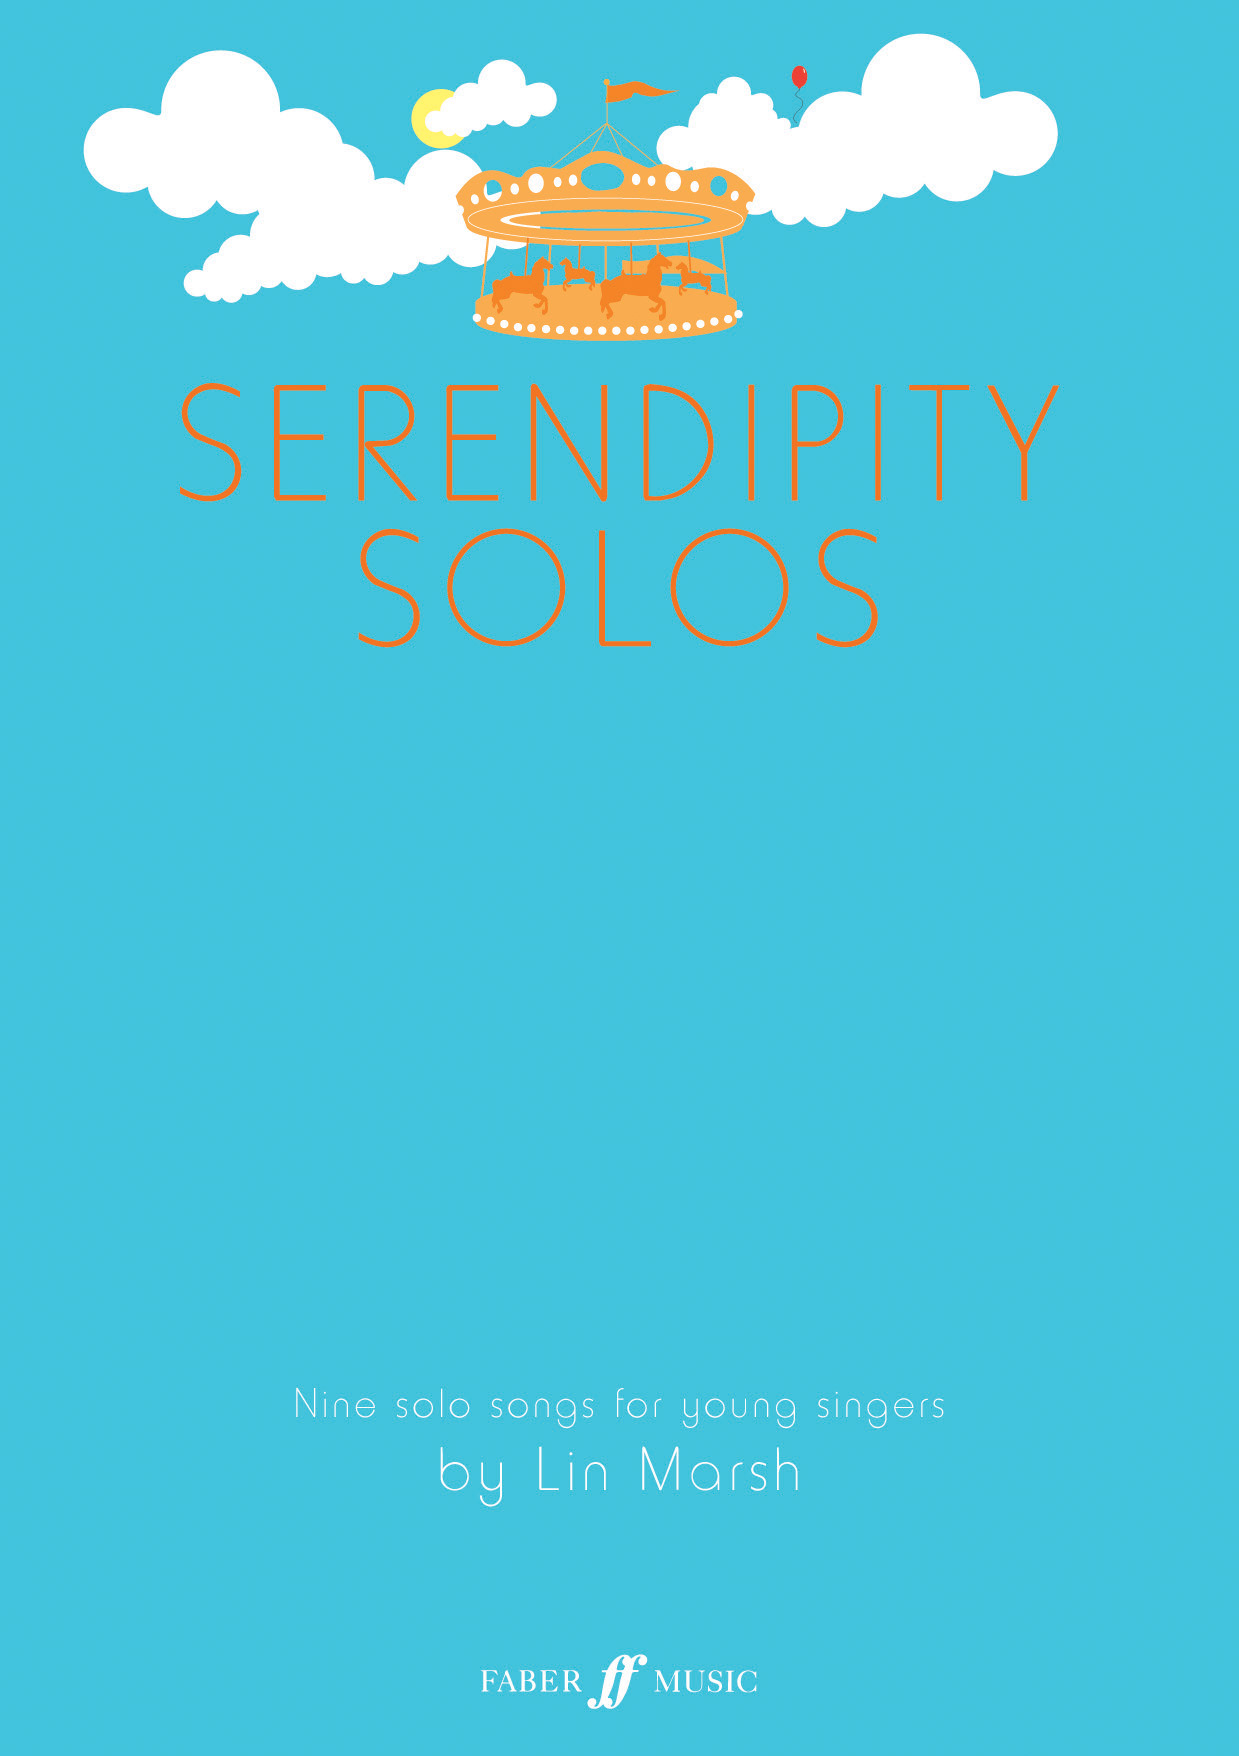 Lin Marsh: Serendipity Solos: Voice & Piano: Mixed Songbook